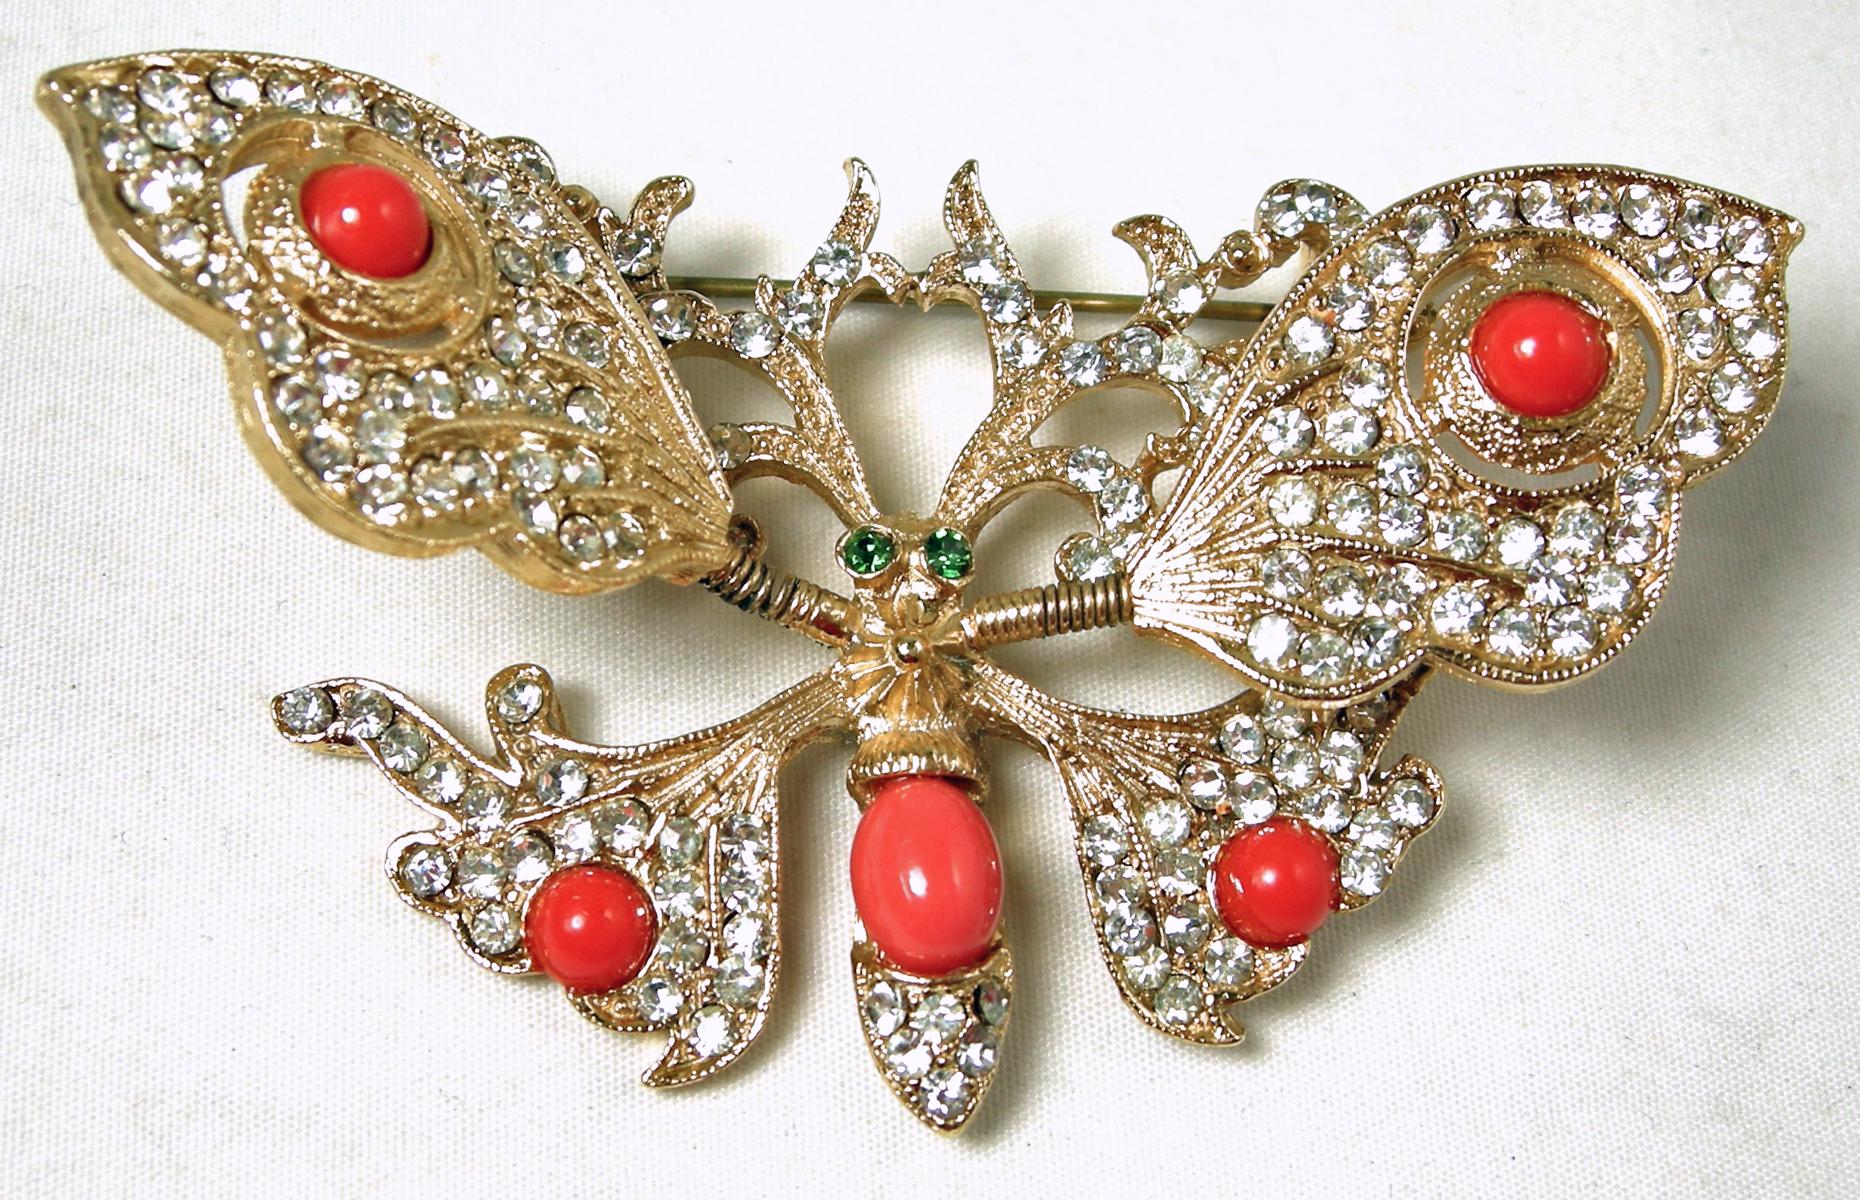 Here is a vintage trembler butterfly brooch with faux coral and clear crystals in a gold tone setting.  The wings move along with you.  In excellent condition, this brooch measures 2-7/8” x 1-5/8”.